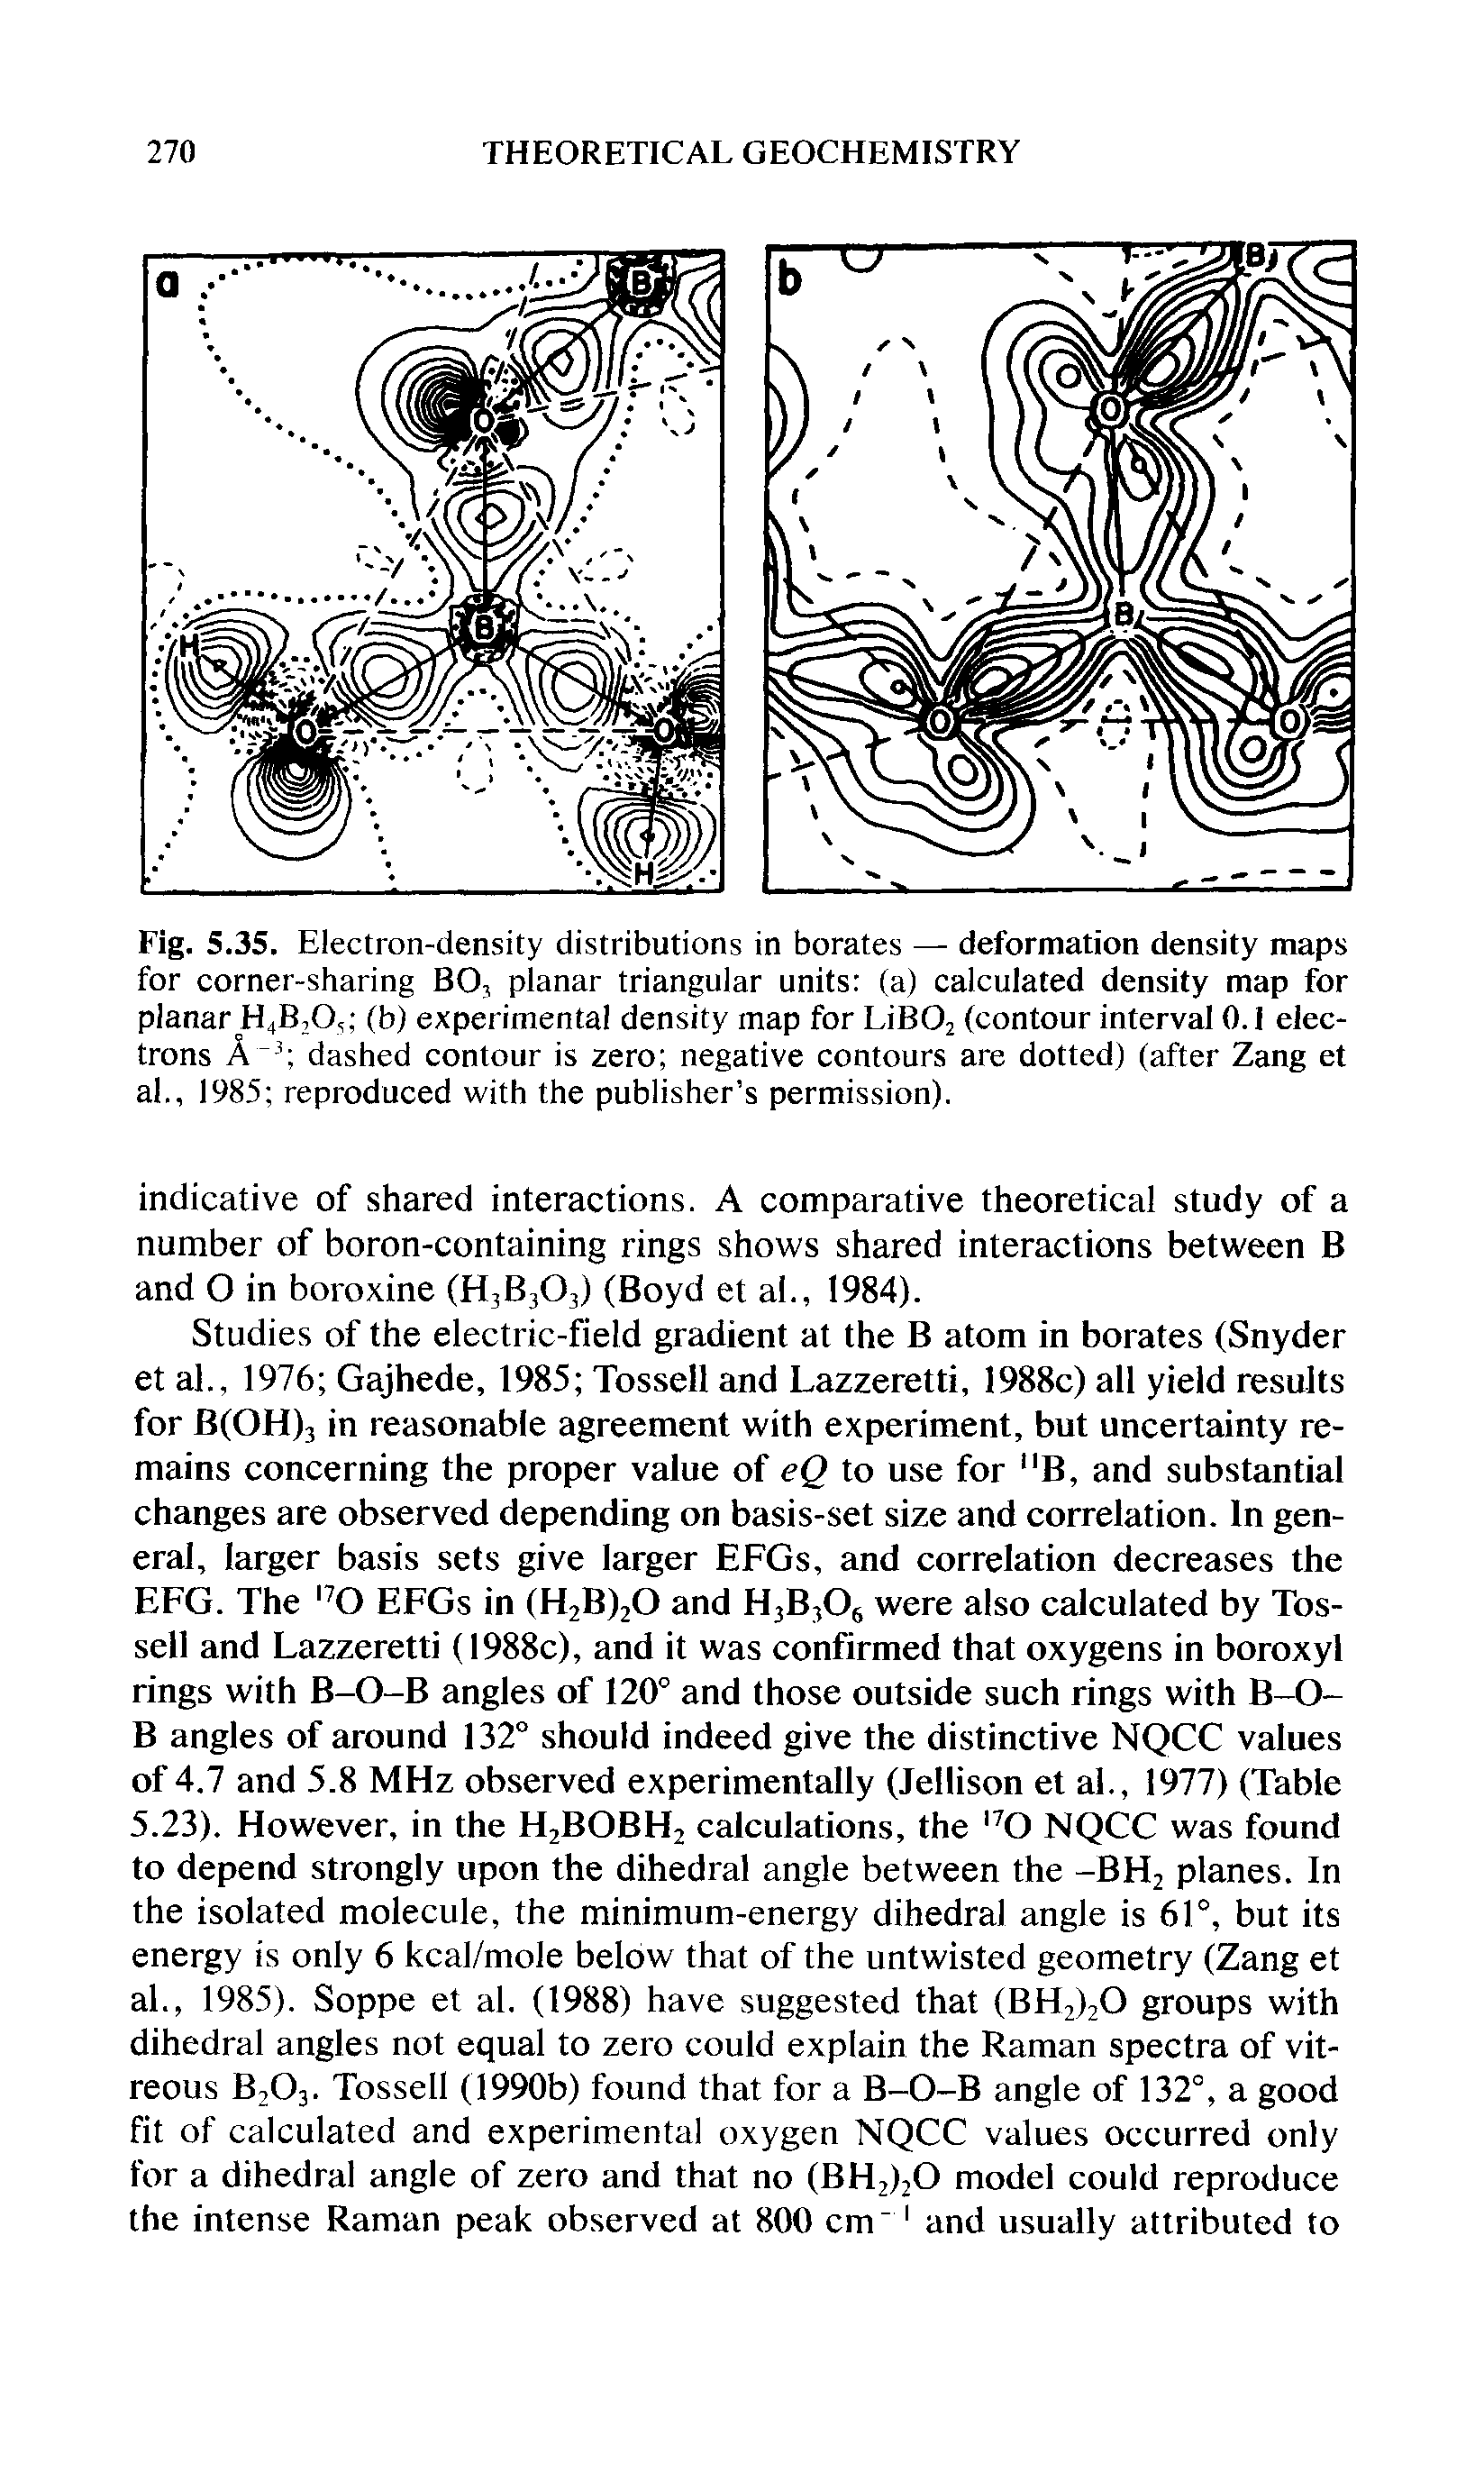 Fig. 5.35. Electron-density distributions in borates — deformation density maps for corner-sharing BO, planar triangular units (a) calculated density map for planar H4B,0, (b) experimental density map for LiBOj (contour interval 0.1 electrons A dashed contour is zero negative contours are dotted) (after Zang et al., 1985 reproduced with the publisher s permission).